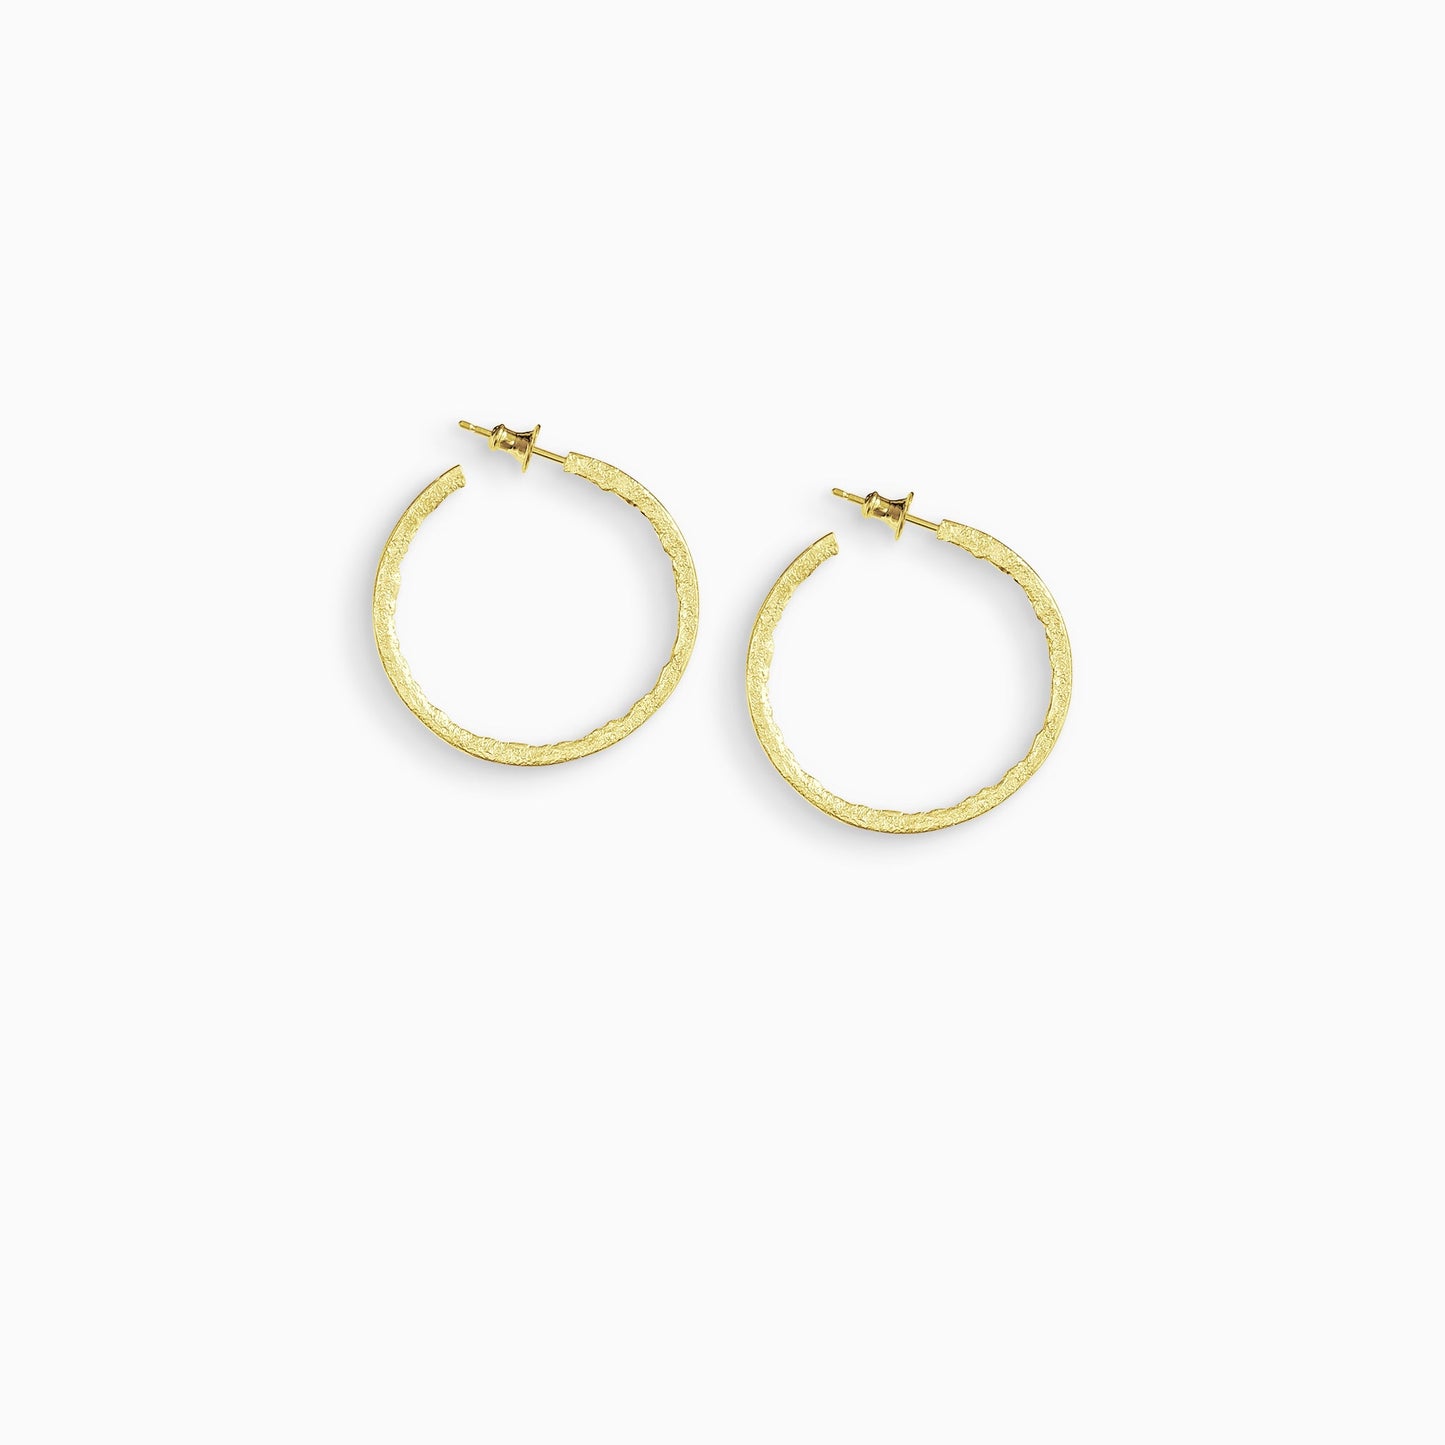 A pair of 18ct Fairtrade yellow gold round hoop earrings with a stud fastening. Smooth outside edge, fragmented inside edges. 36mm outside diameter.